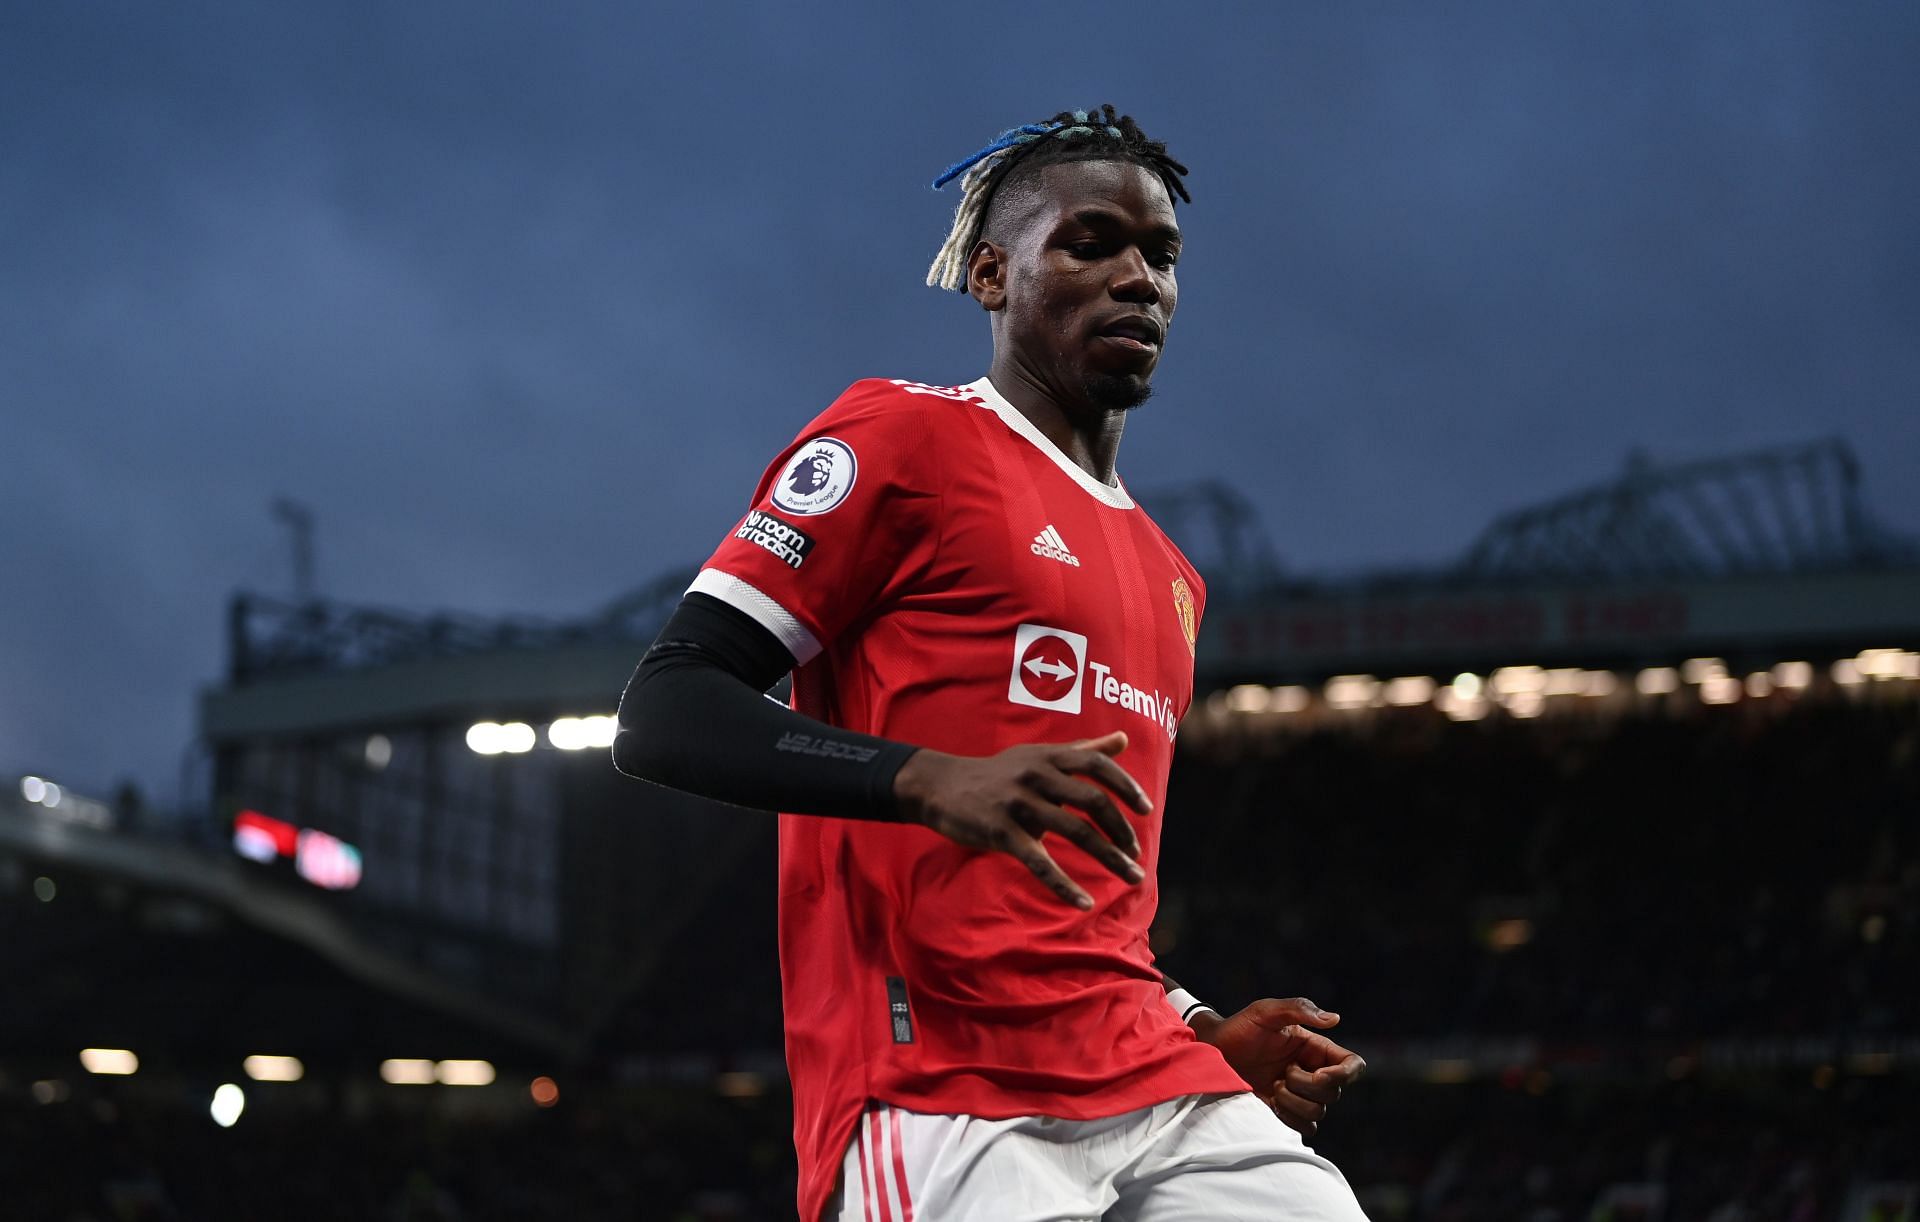 PSG are leading the race to sign Paul Pogba.